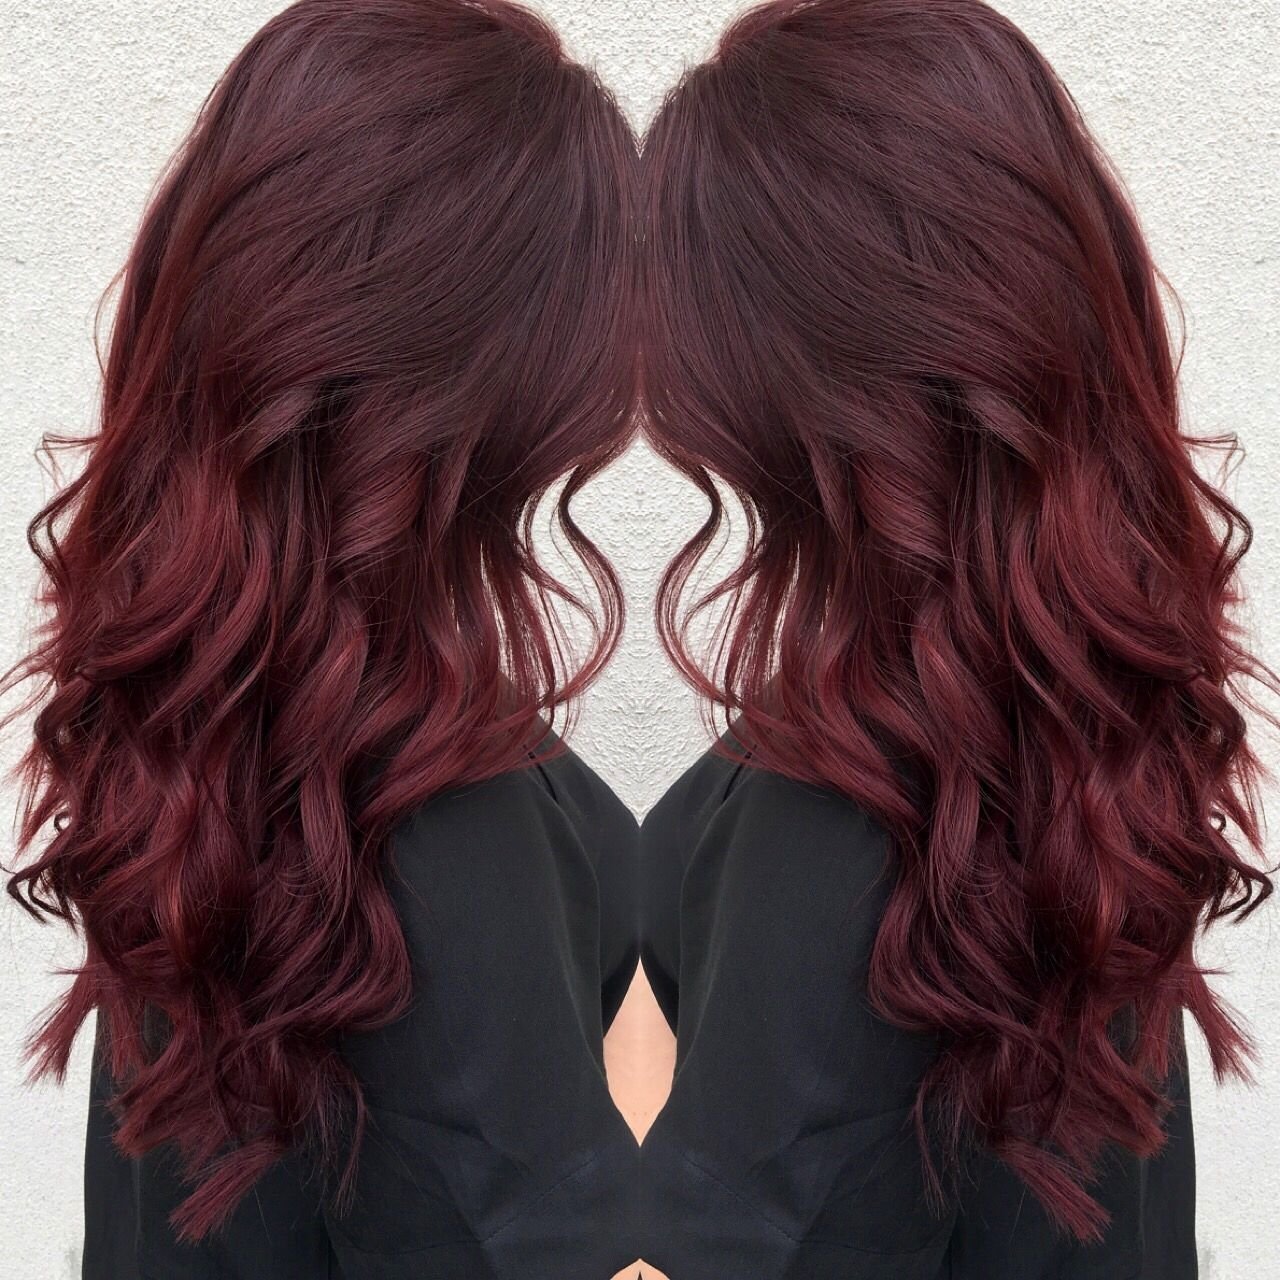 10 Amazing Black And Red Hair Ideas ruby red hair more hair ideas pinterest ruby red hair ruby 2022